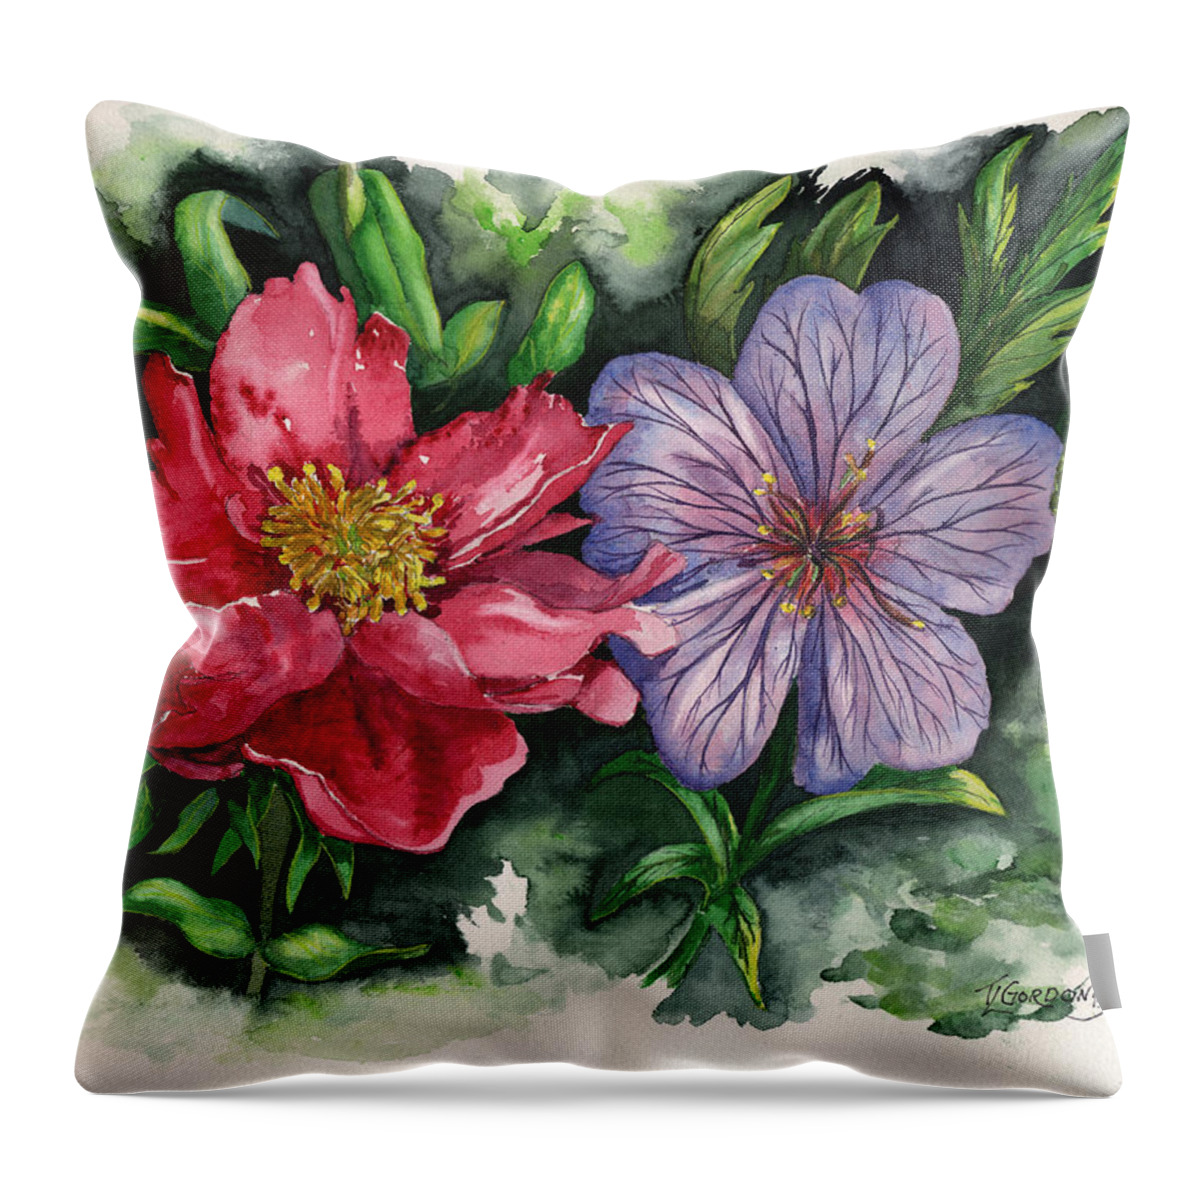 Tim Throw Pillow featuring the painting Spring blooms by Timithy L Gordon